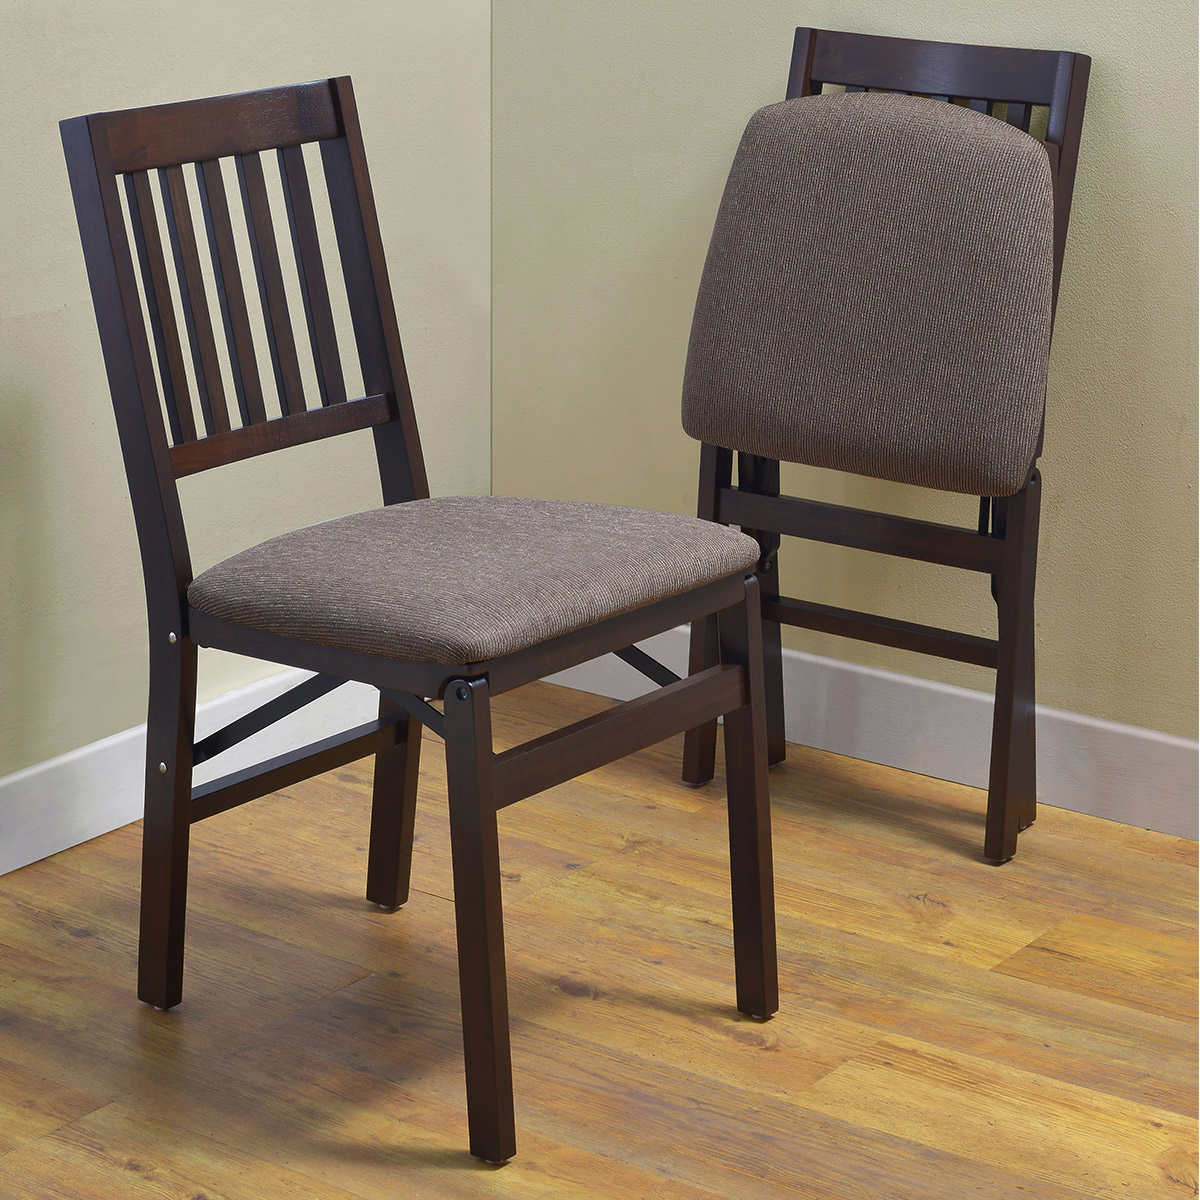 Stakmore Solid Wood Upholstered Folding Chair Costco